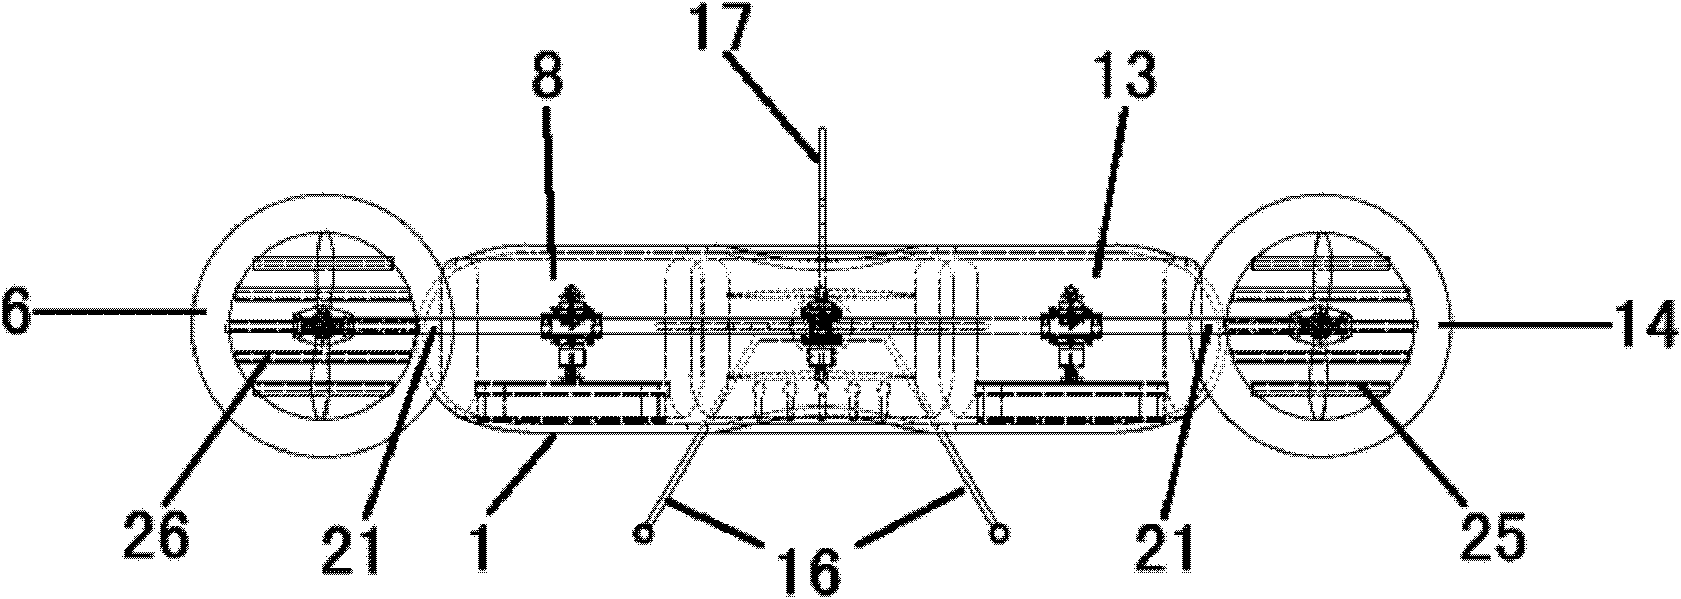 Distributed power multi-rotor VTOL (vertical take off and landing) aircraft and control method thereof